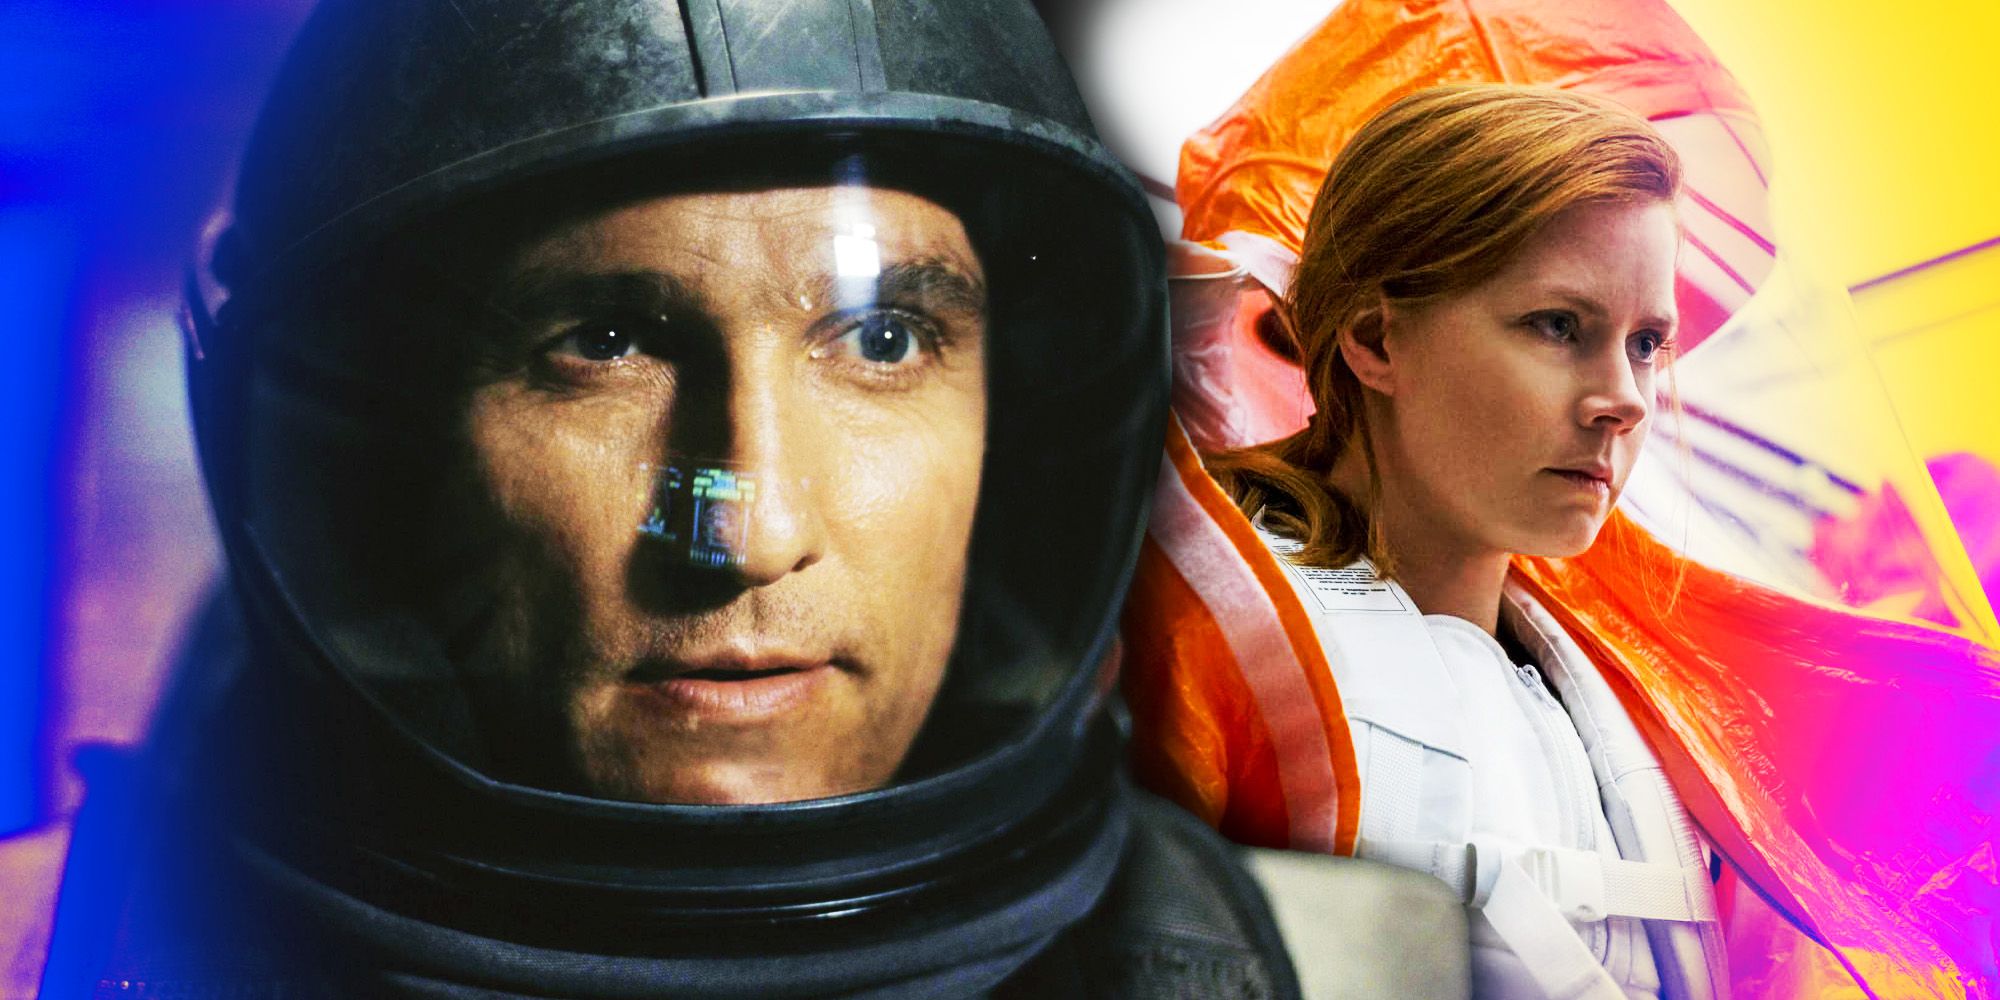 Matthew McConaughey in Interstellar and Amy Adams in Arrival